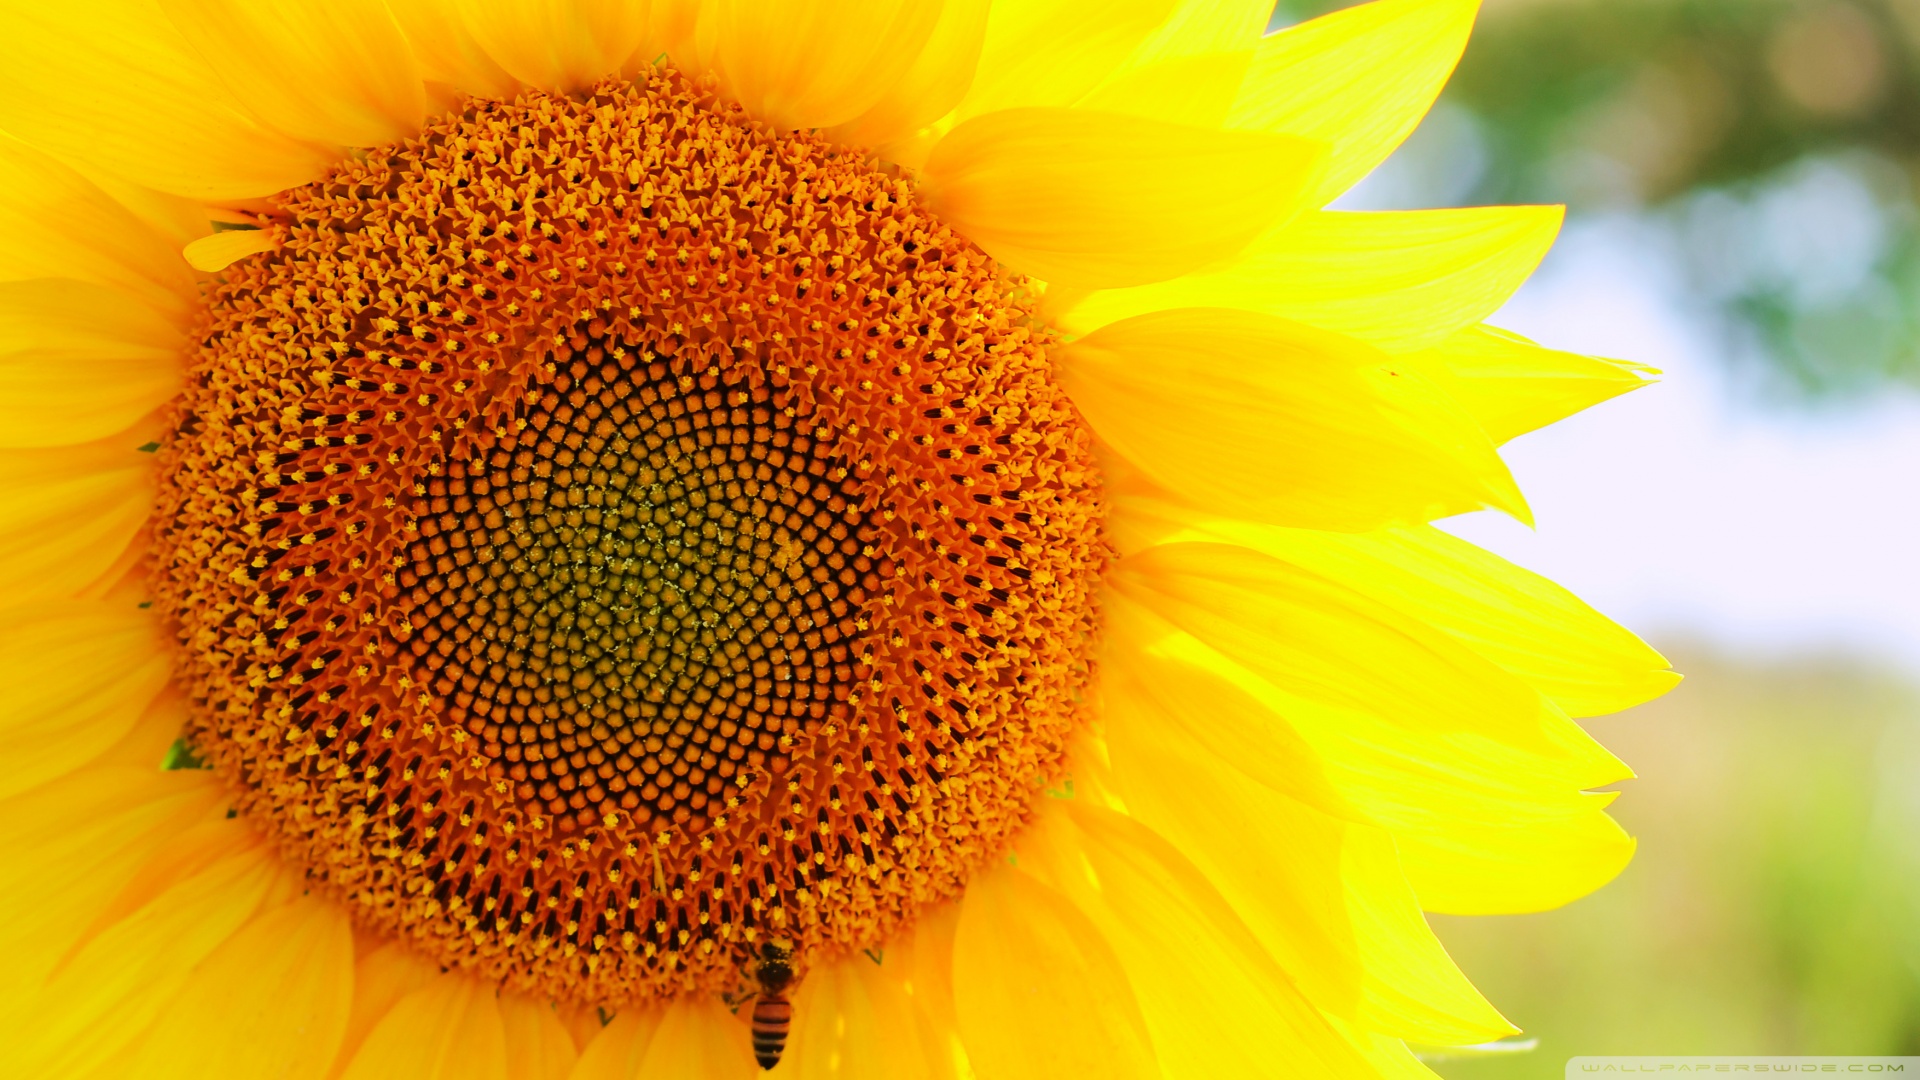 sunflower_and_bee-wallpaper-1920x1080